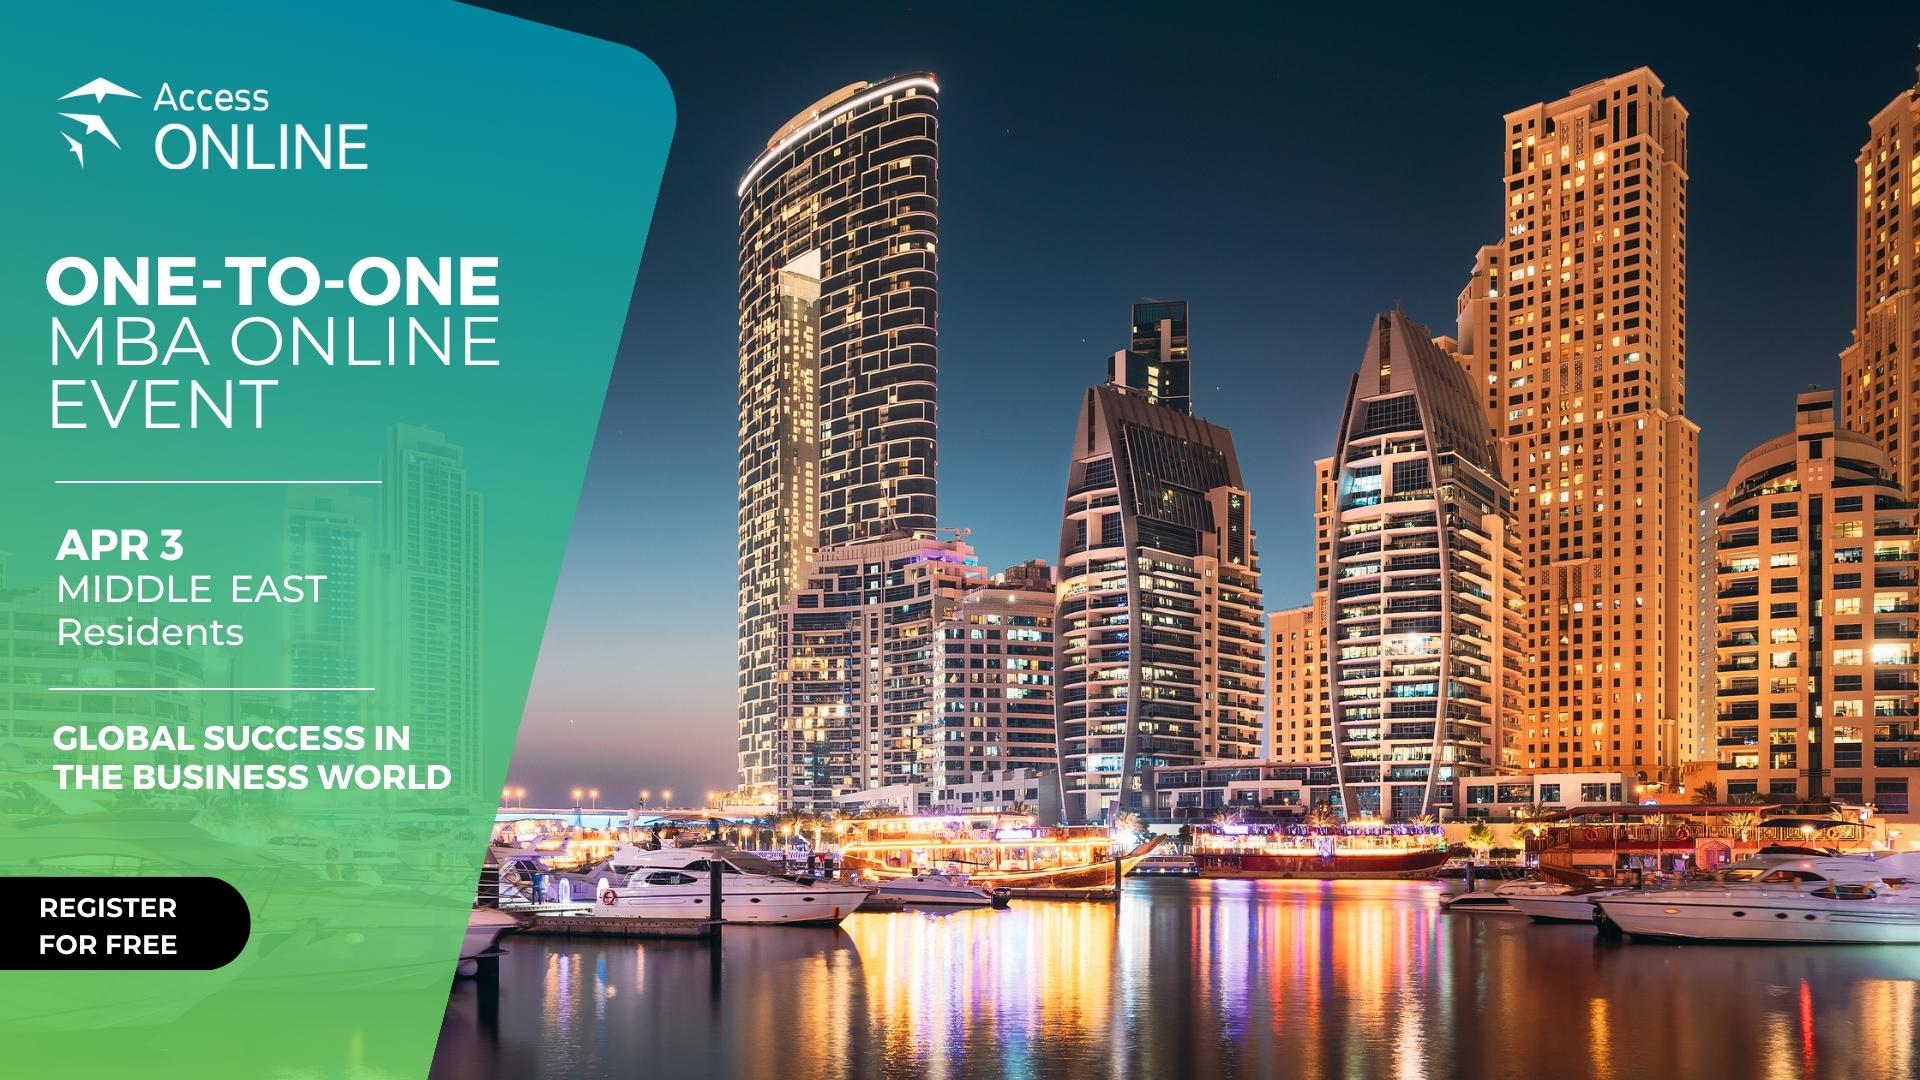 Exclusive One-to-One MBA Online Event in the Middle East, Online Event